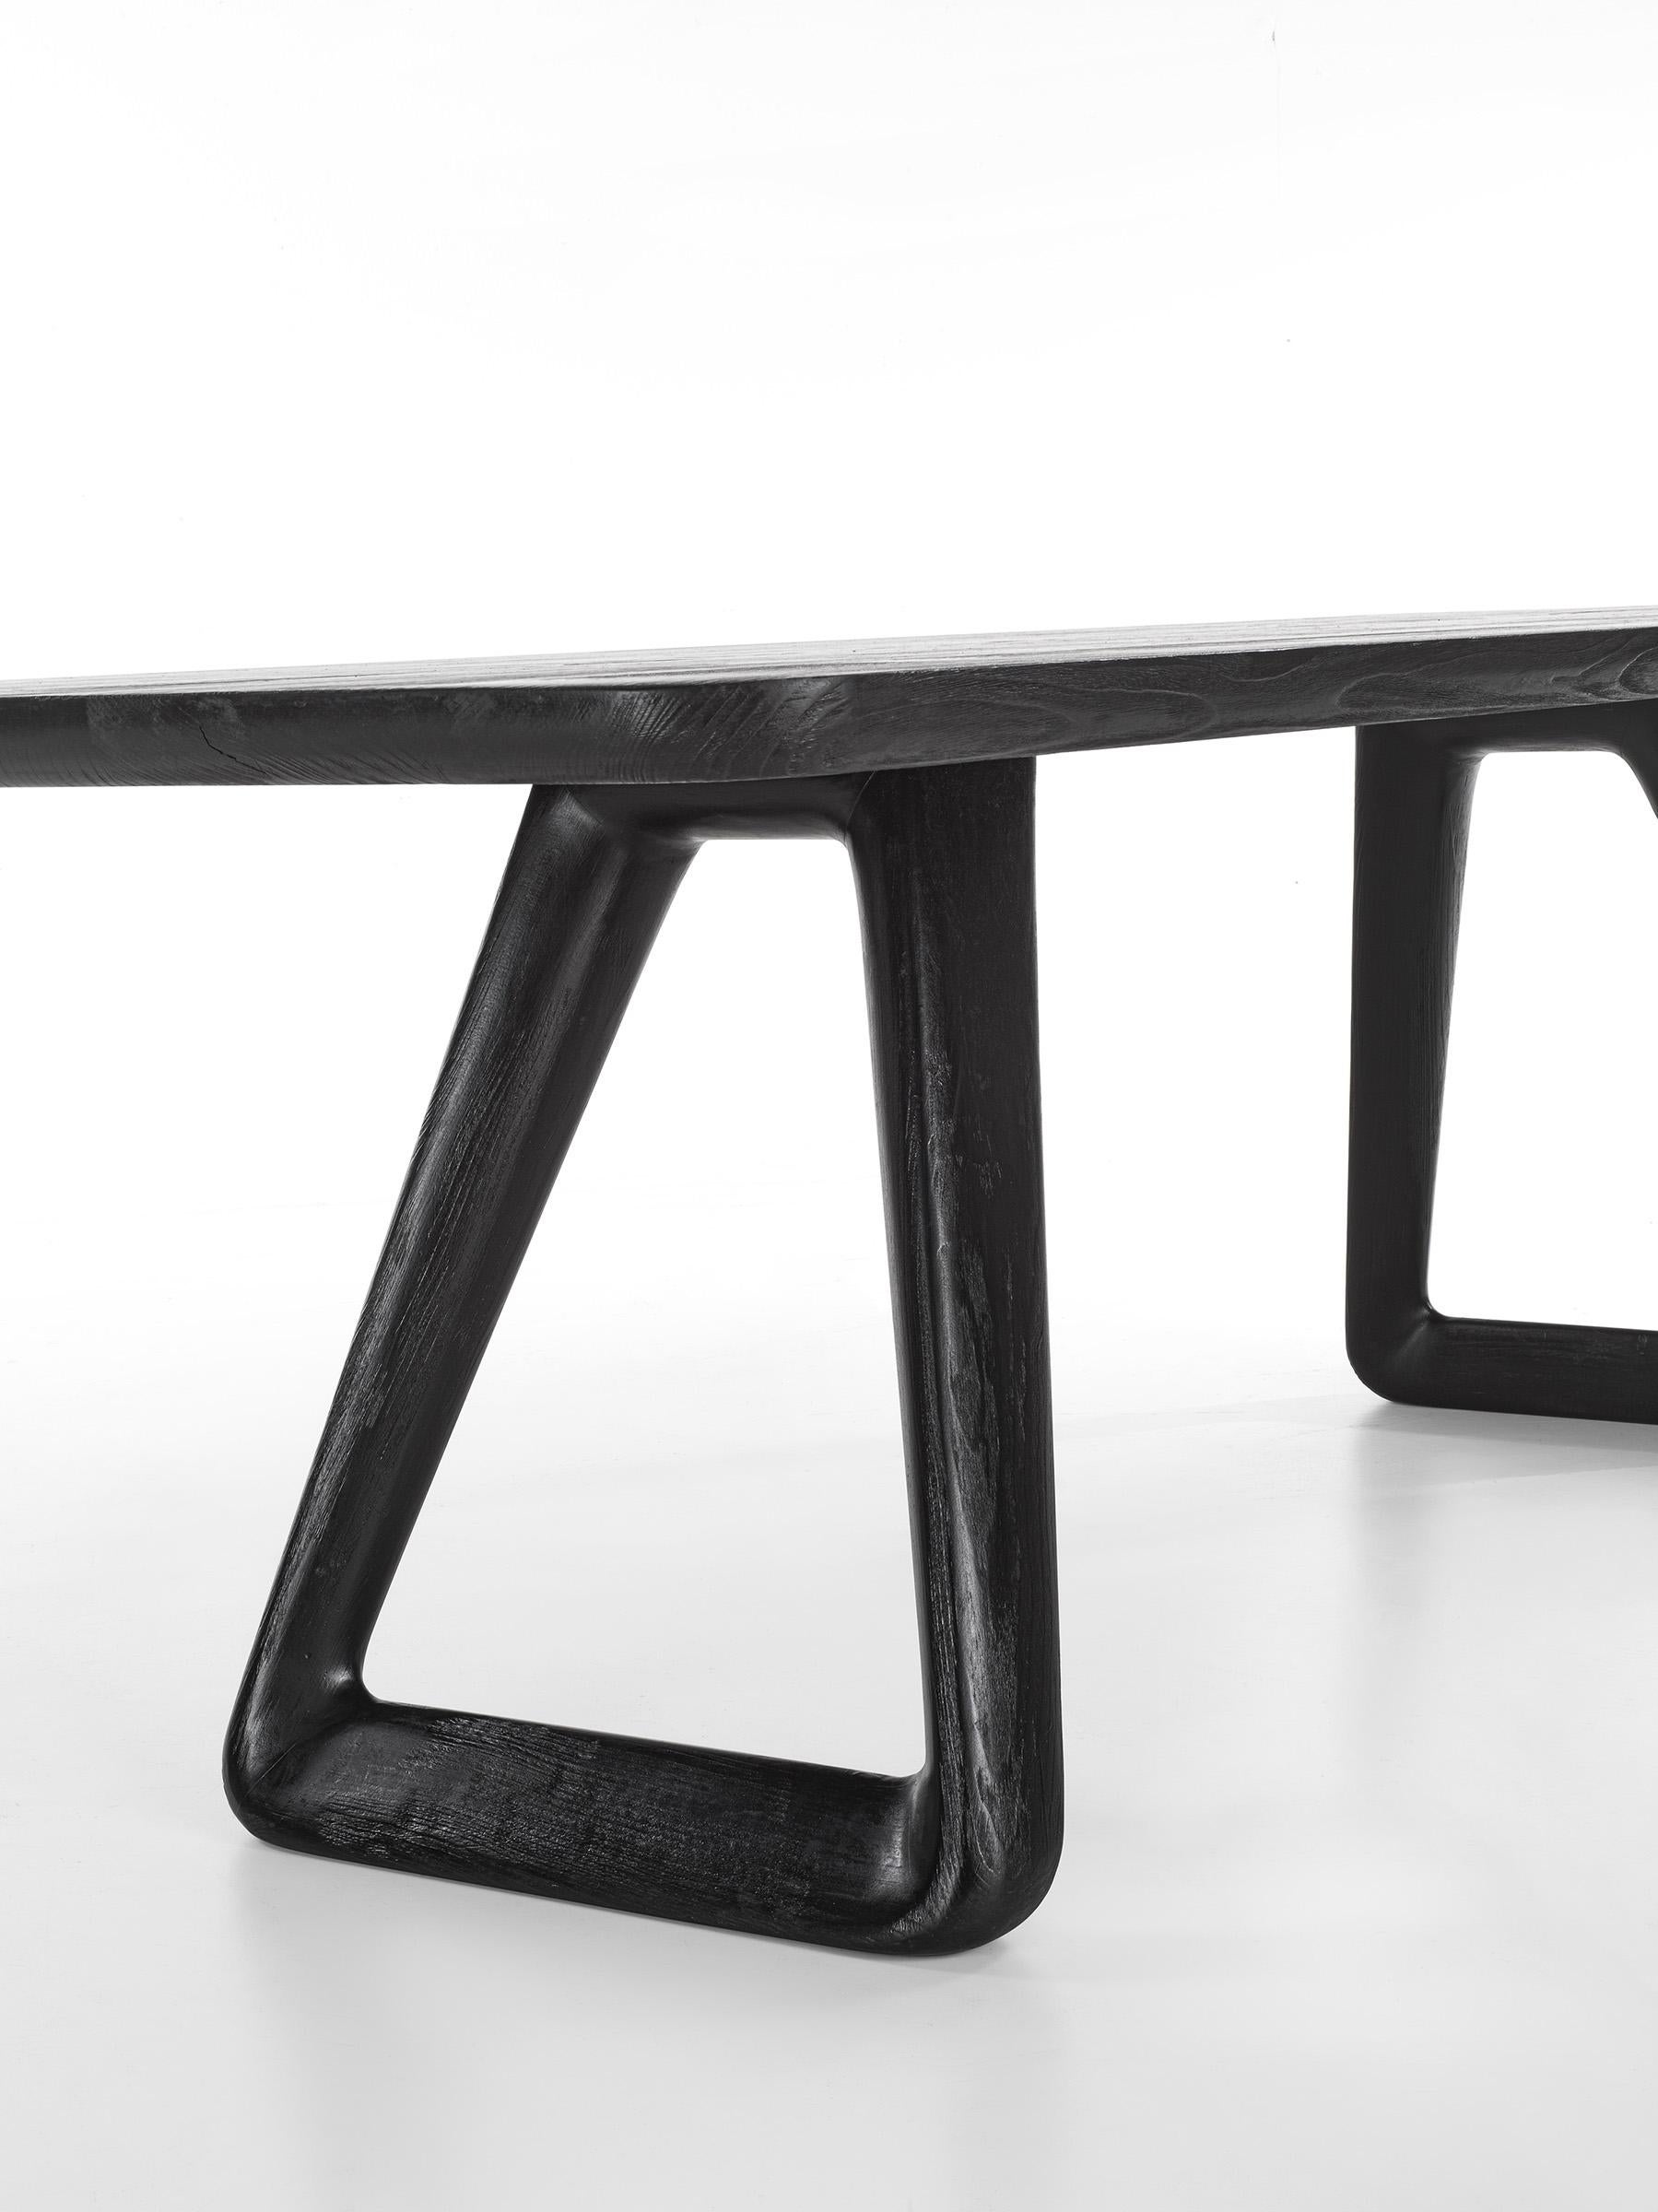 Italian Sospiro Wood Dining Table, Designed by Claudio Bellini, Made in Italy For Sale